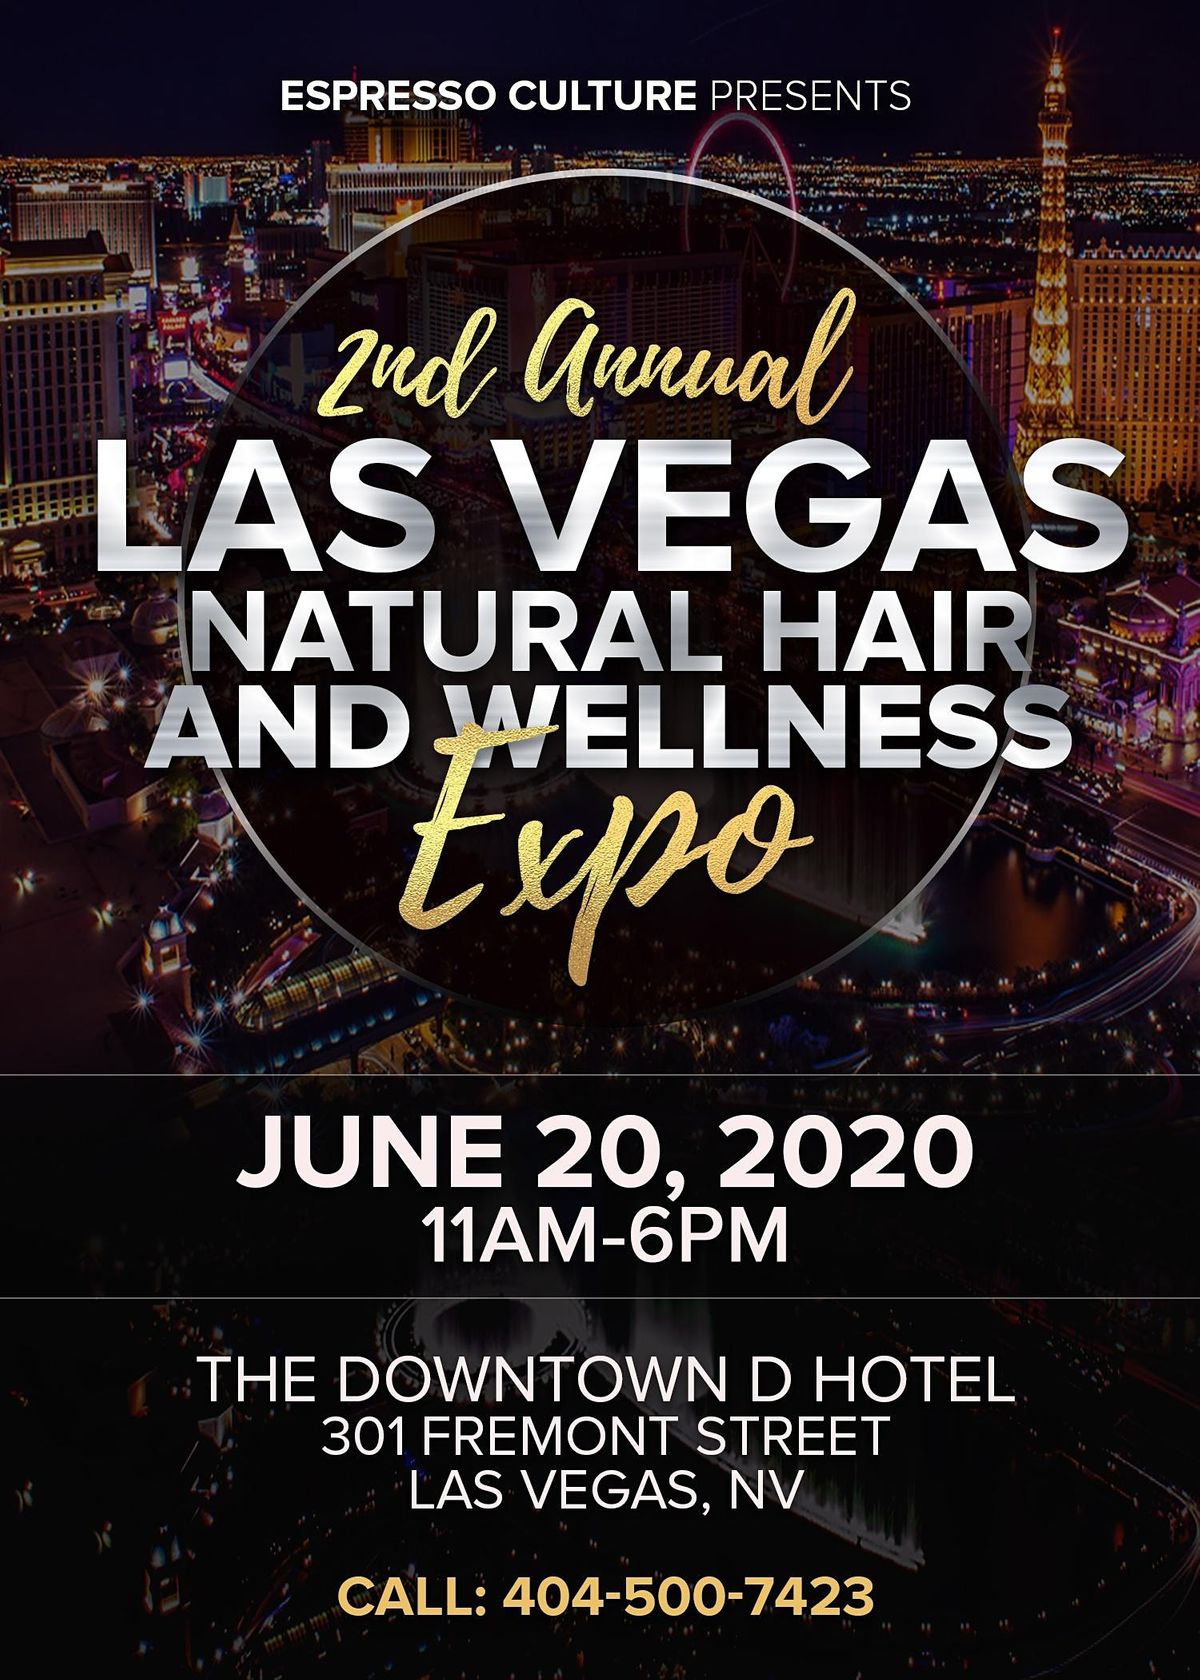 2nd Annual Las Vegas Natural Hair and Wellness Expo